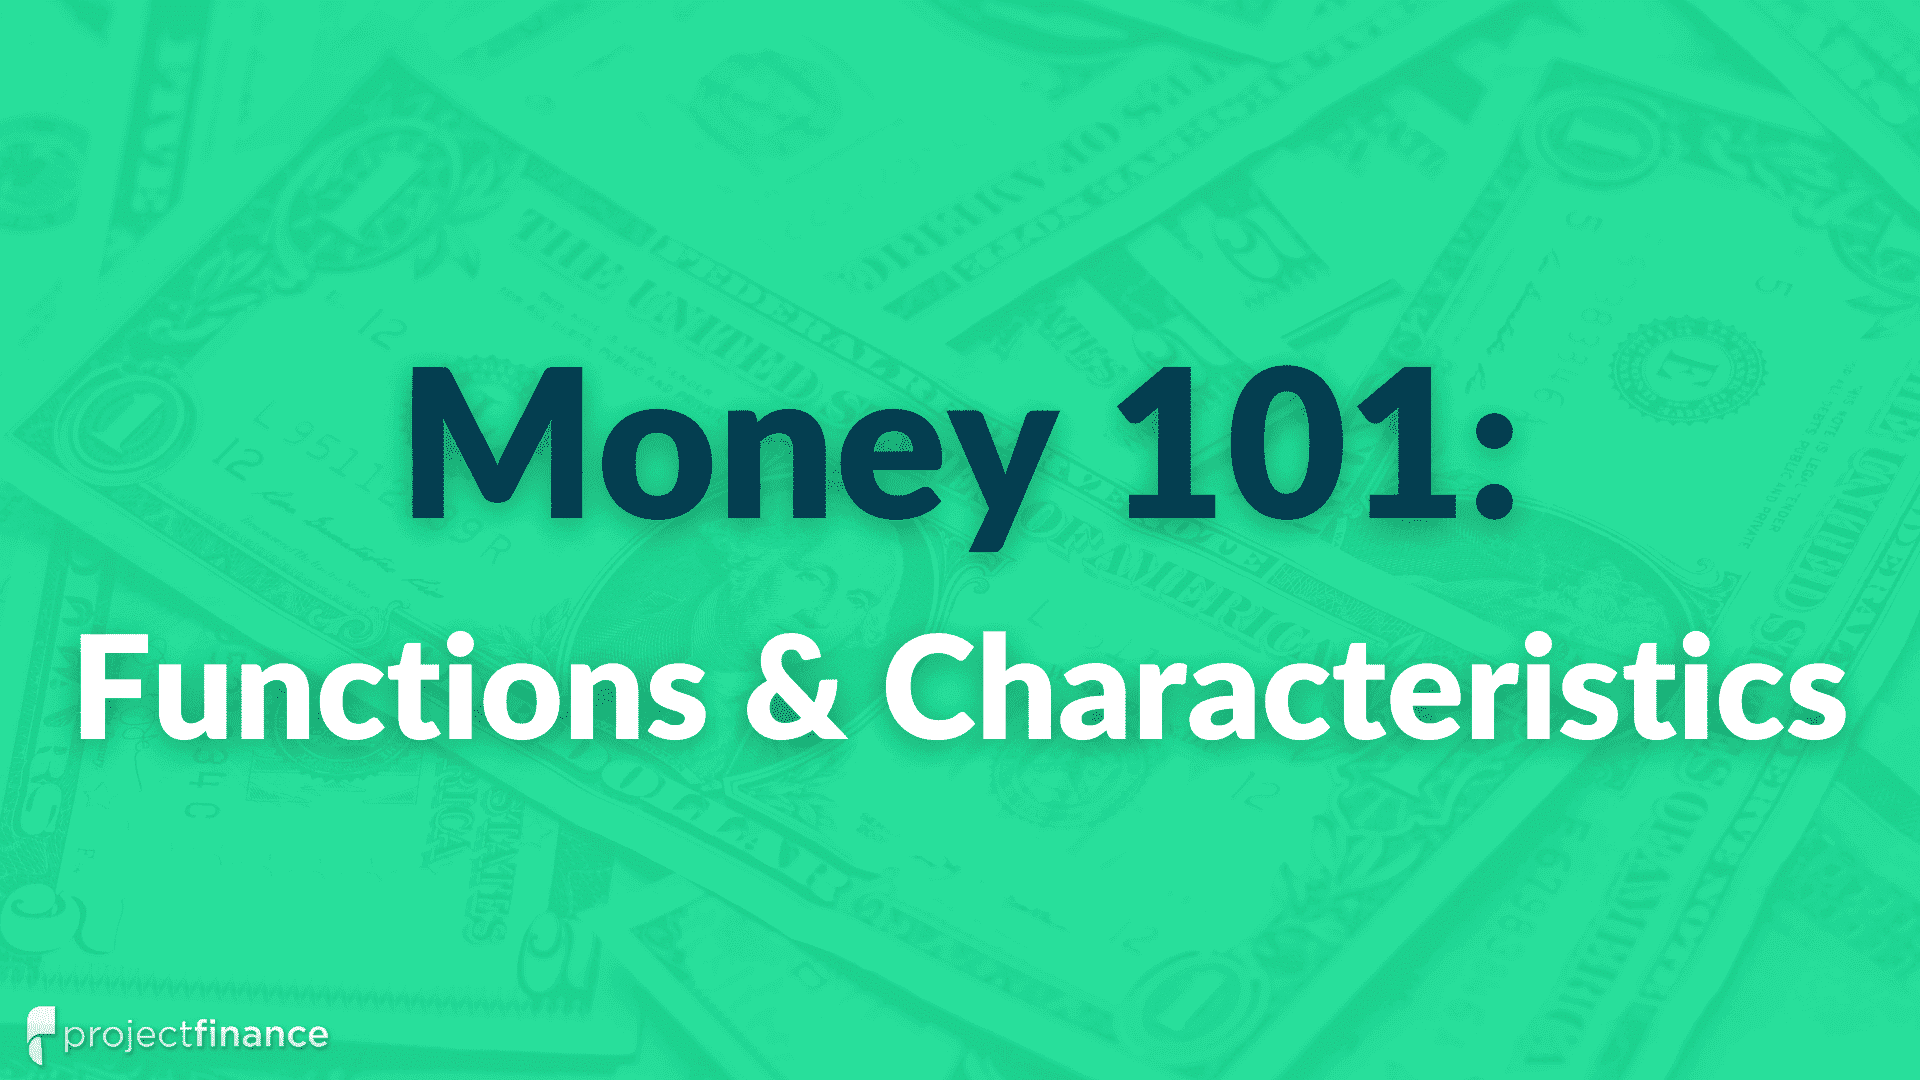 functions and characteristics of money